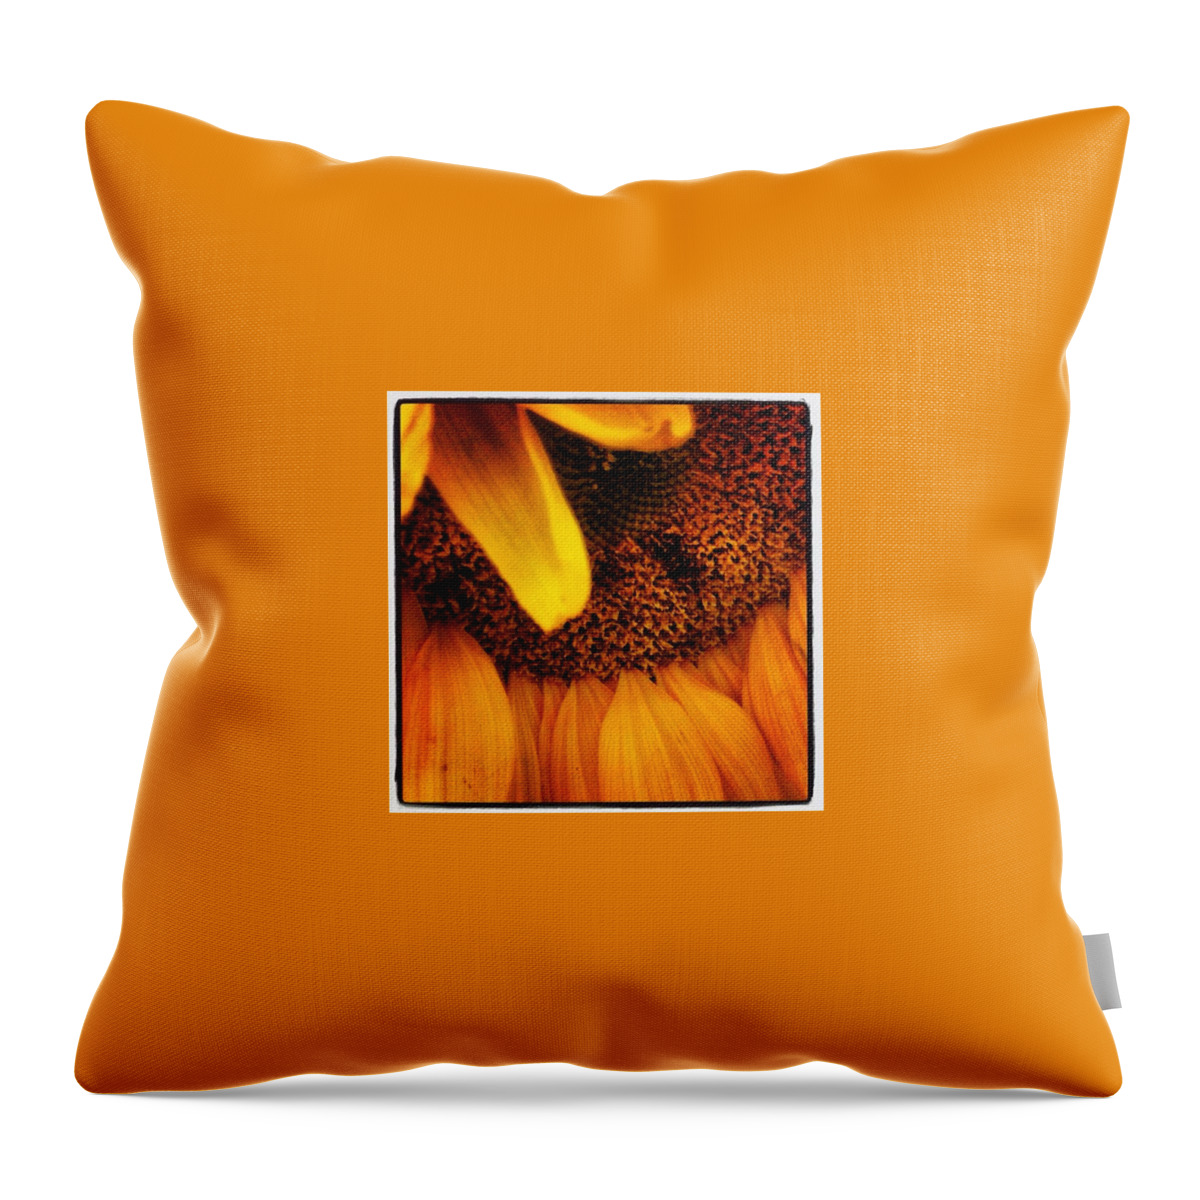  Throw Pillow featuring the photograph Sunflower by Lorelle Phoenix